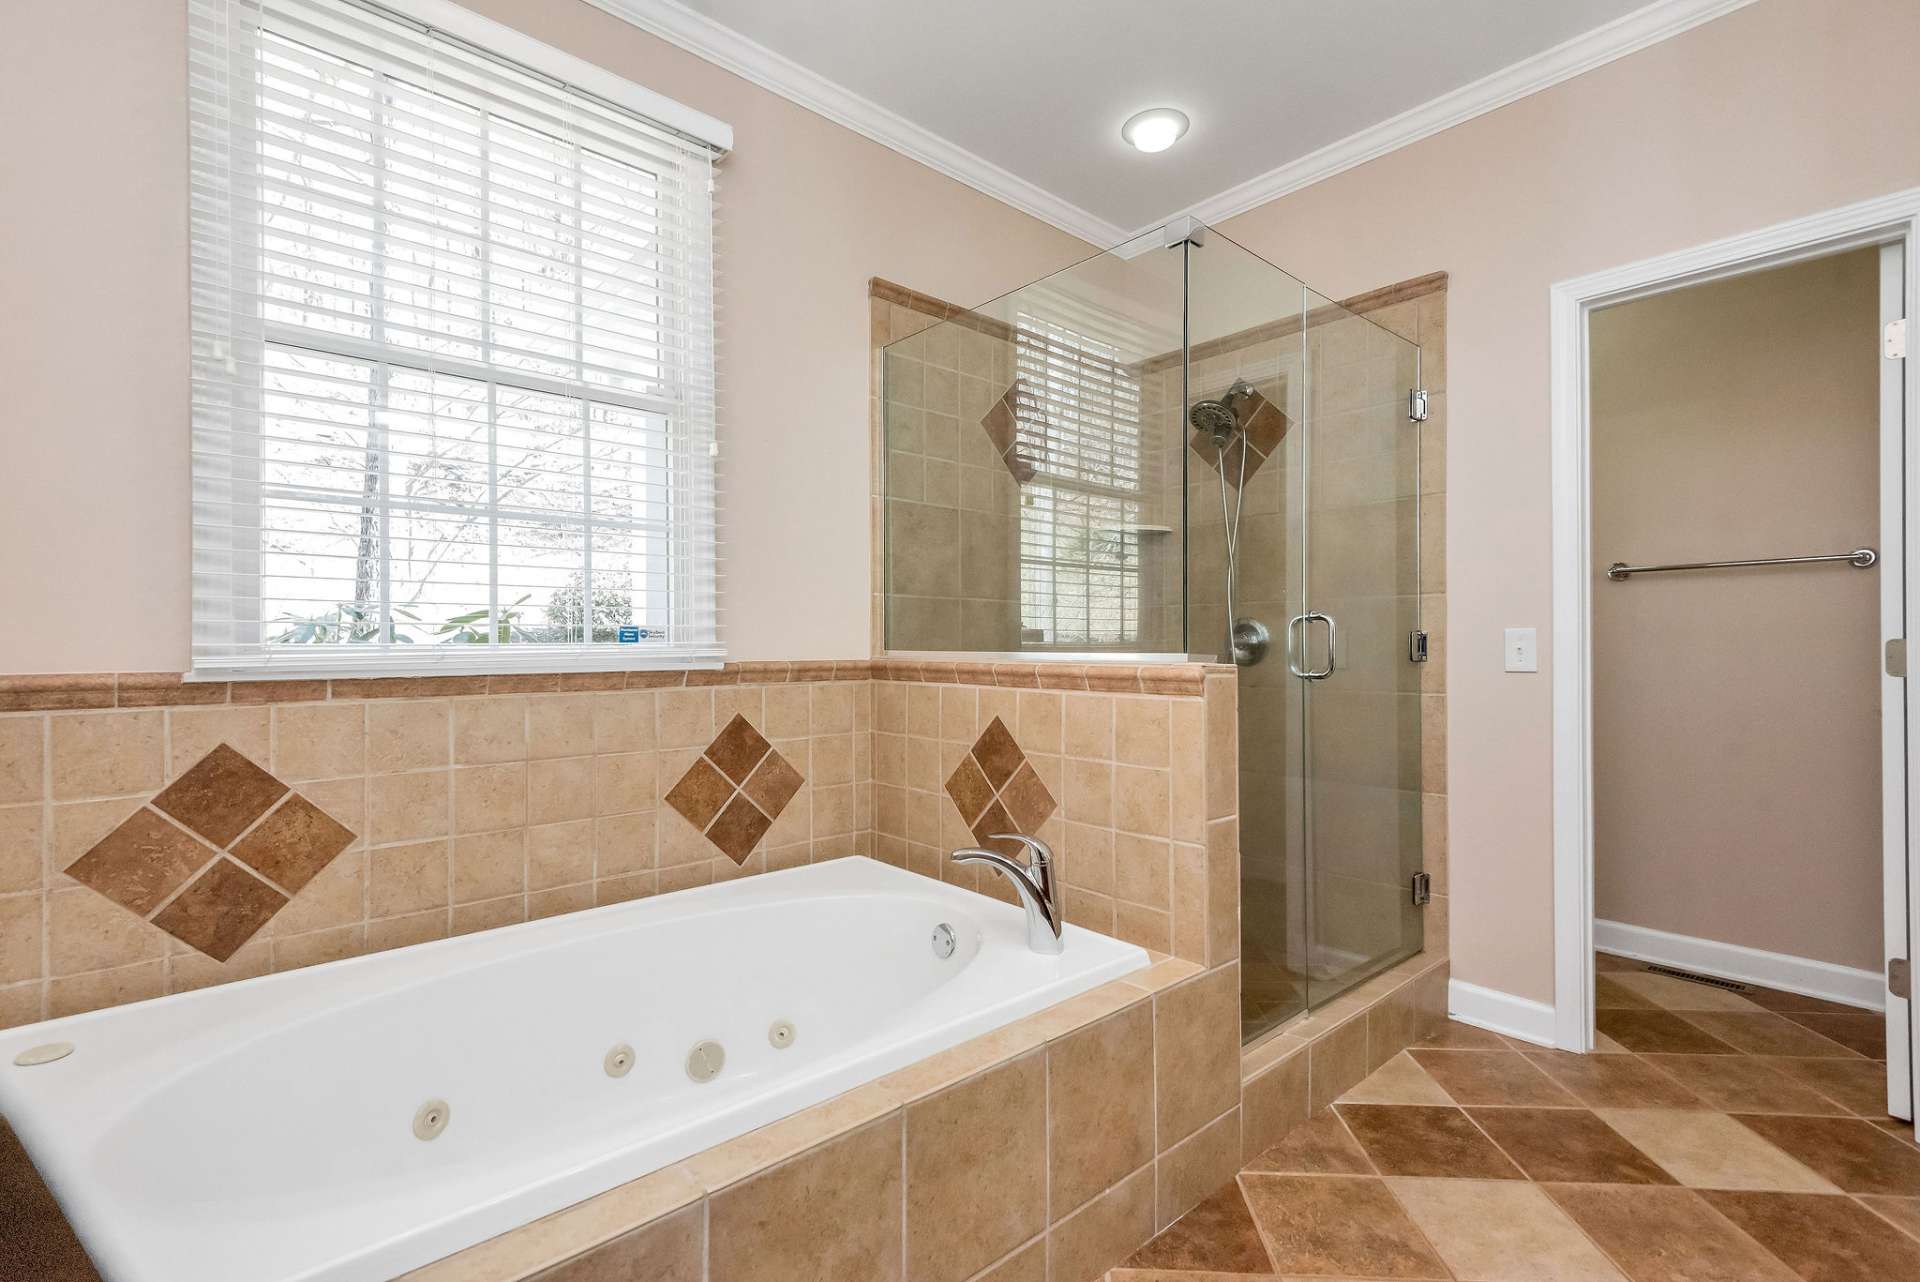 Enjoy luxury and comfort within the ensuite bath of your primary bedroom retreat which offers a whirlpool tub and a spacious tile shower. A water closet is tucked away for privacy.